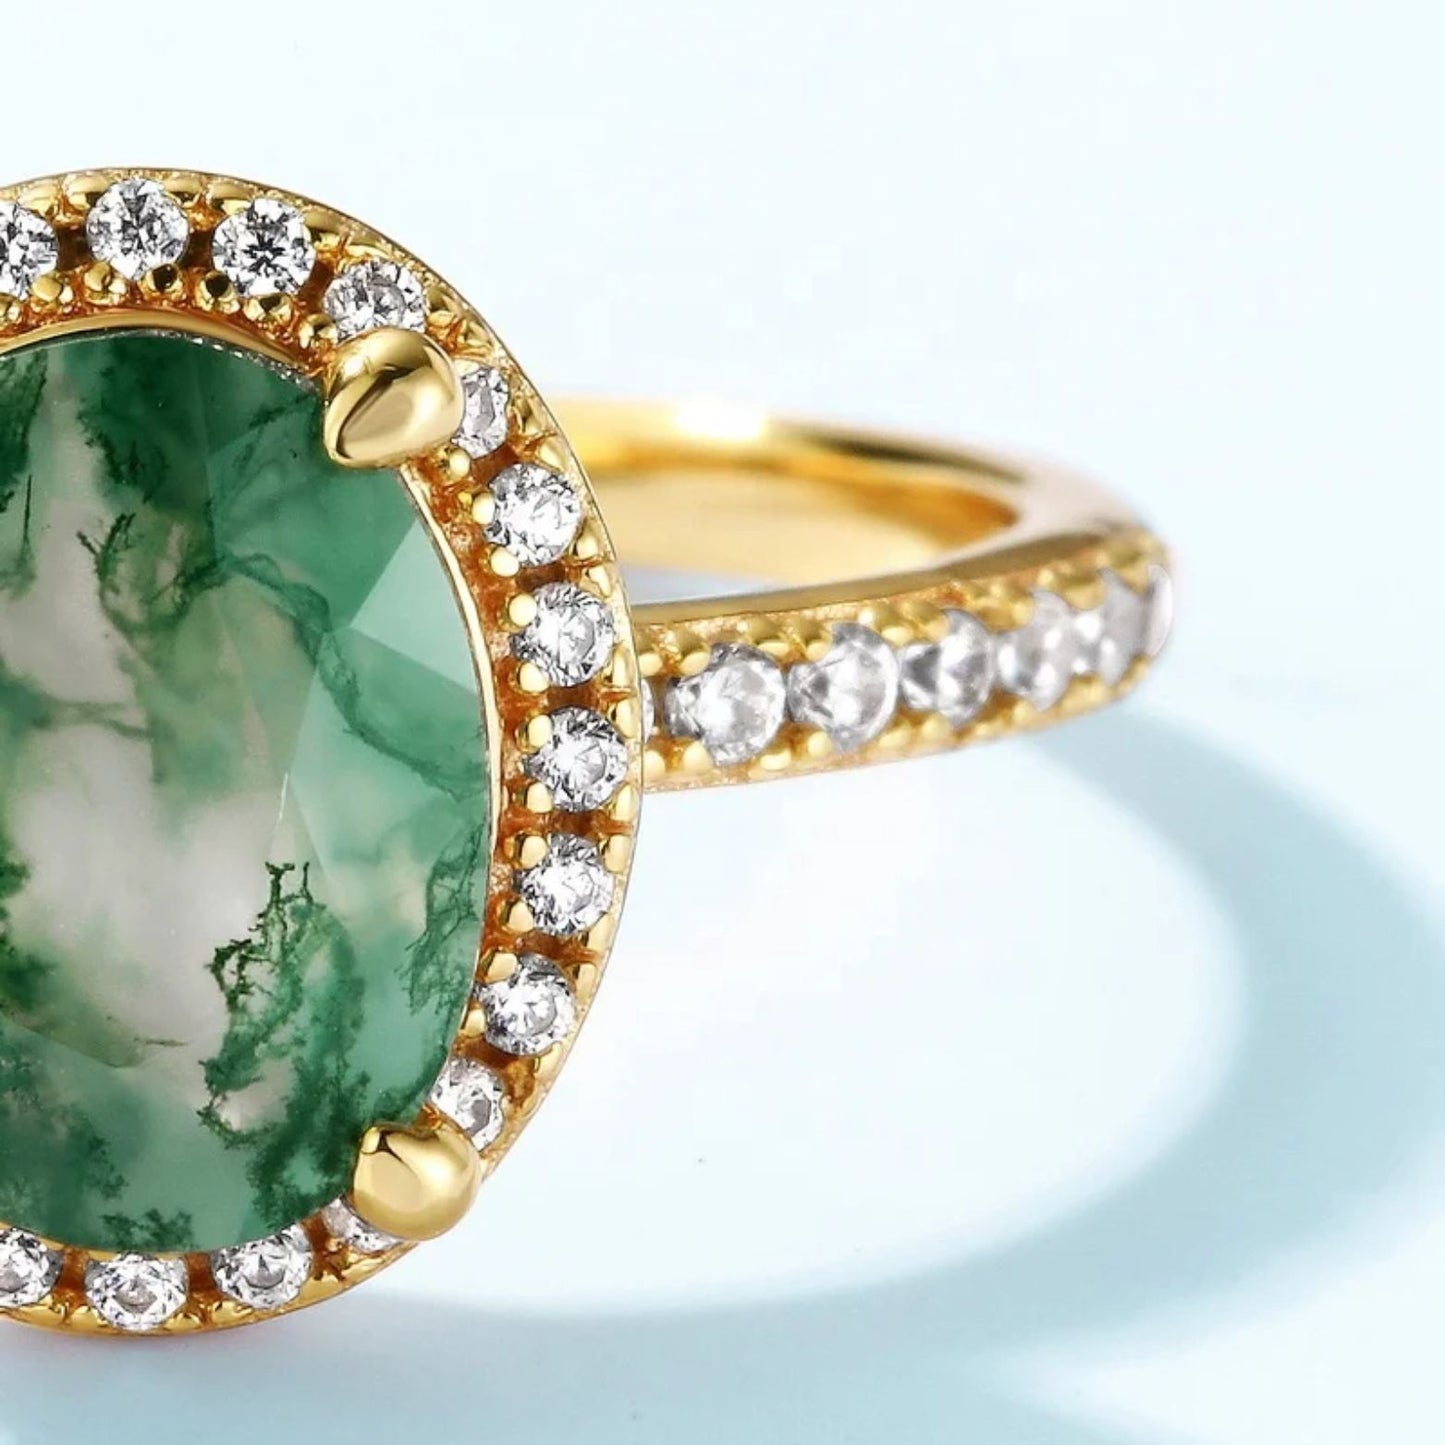 Oval Green Moss Agate Halo Engagement Ring | Unique Gemstone Jewelry